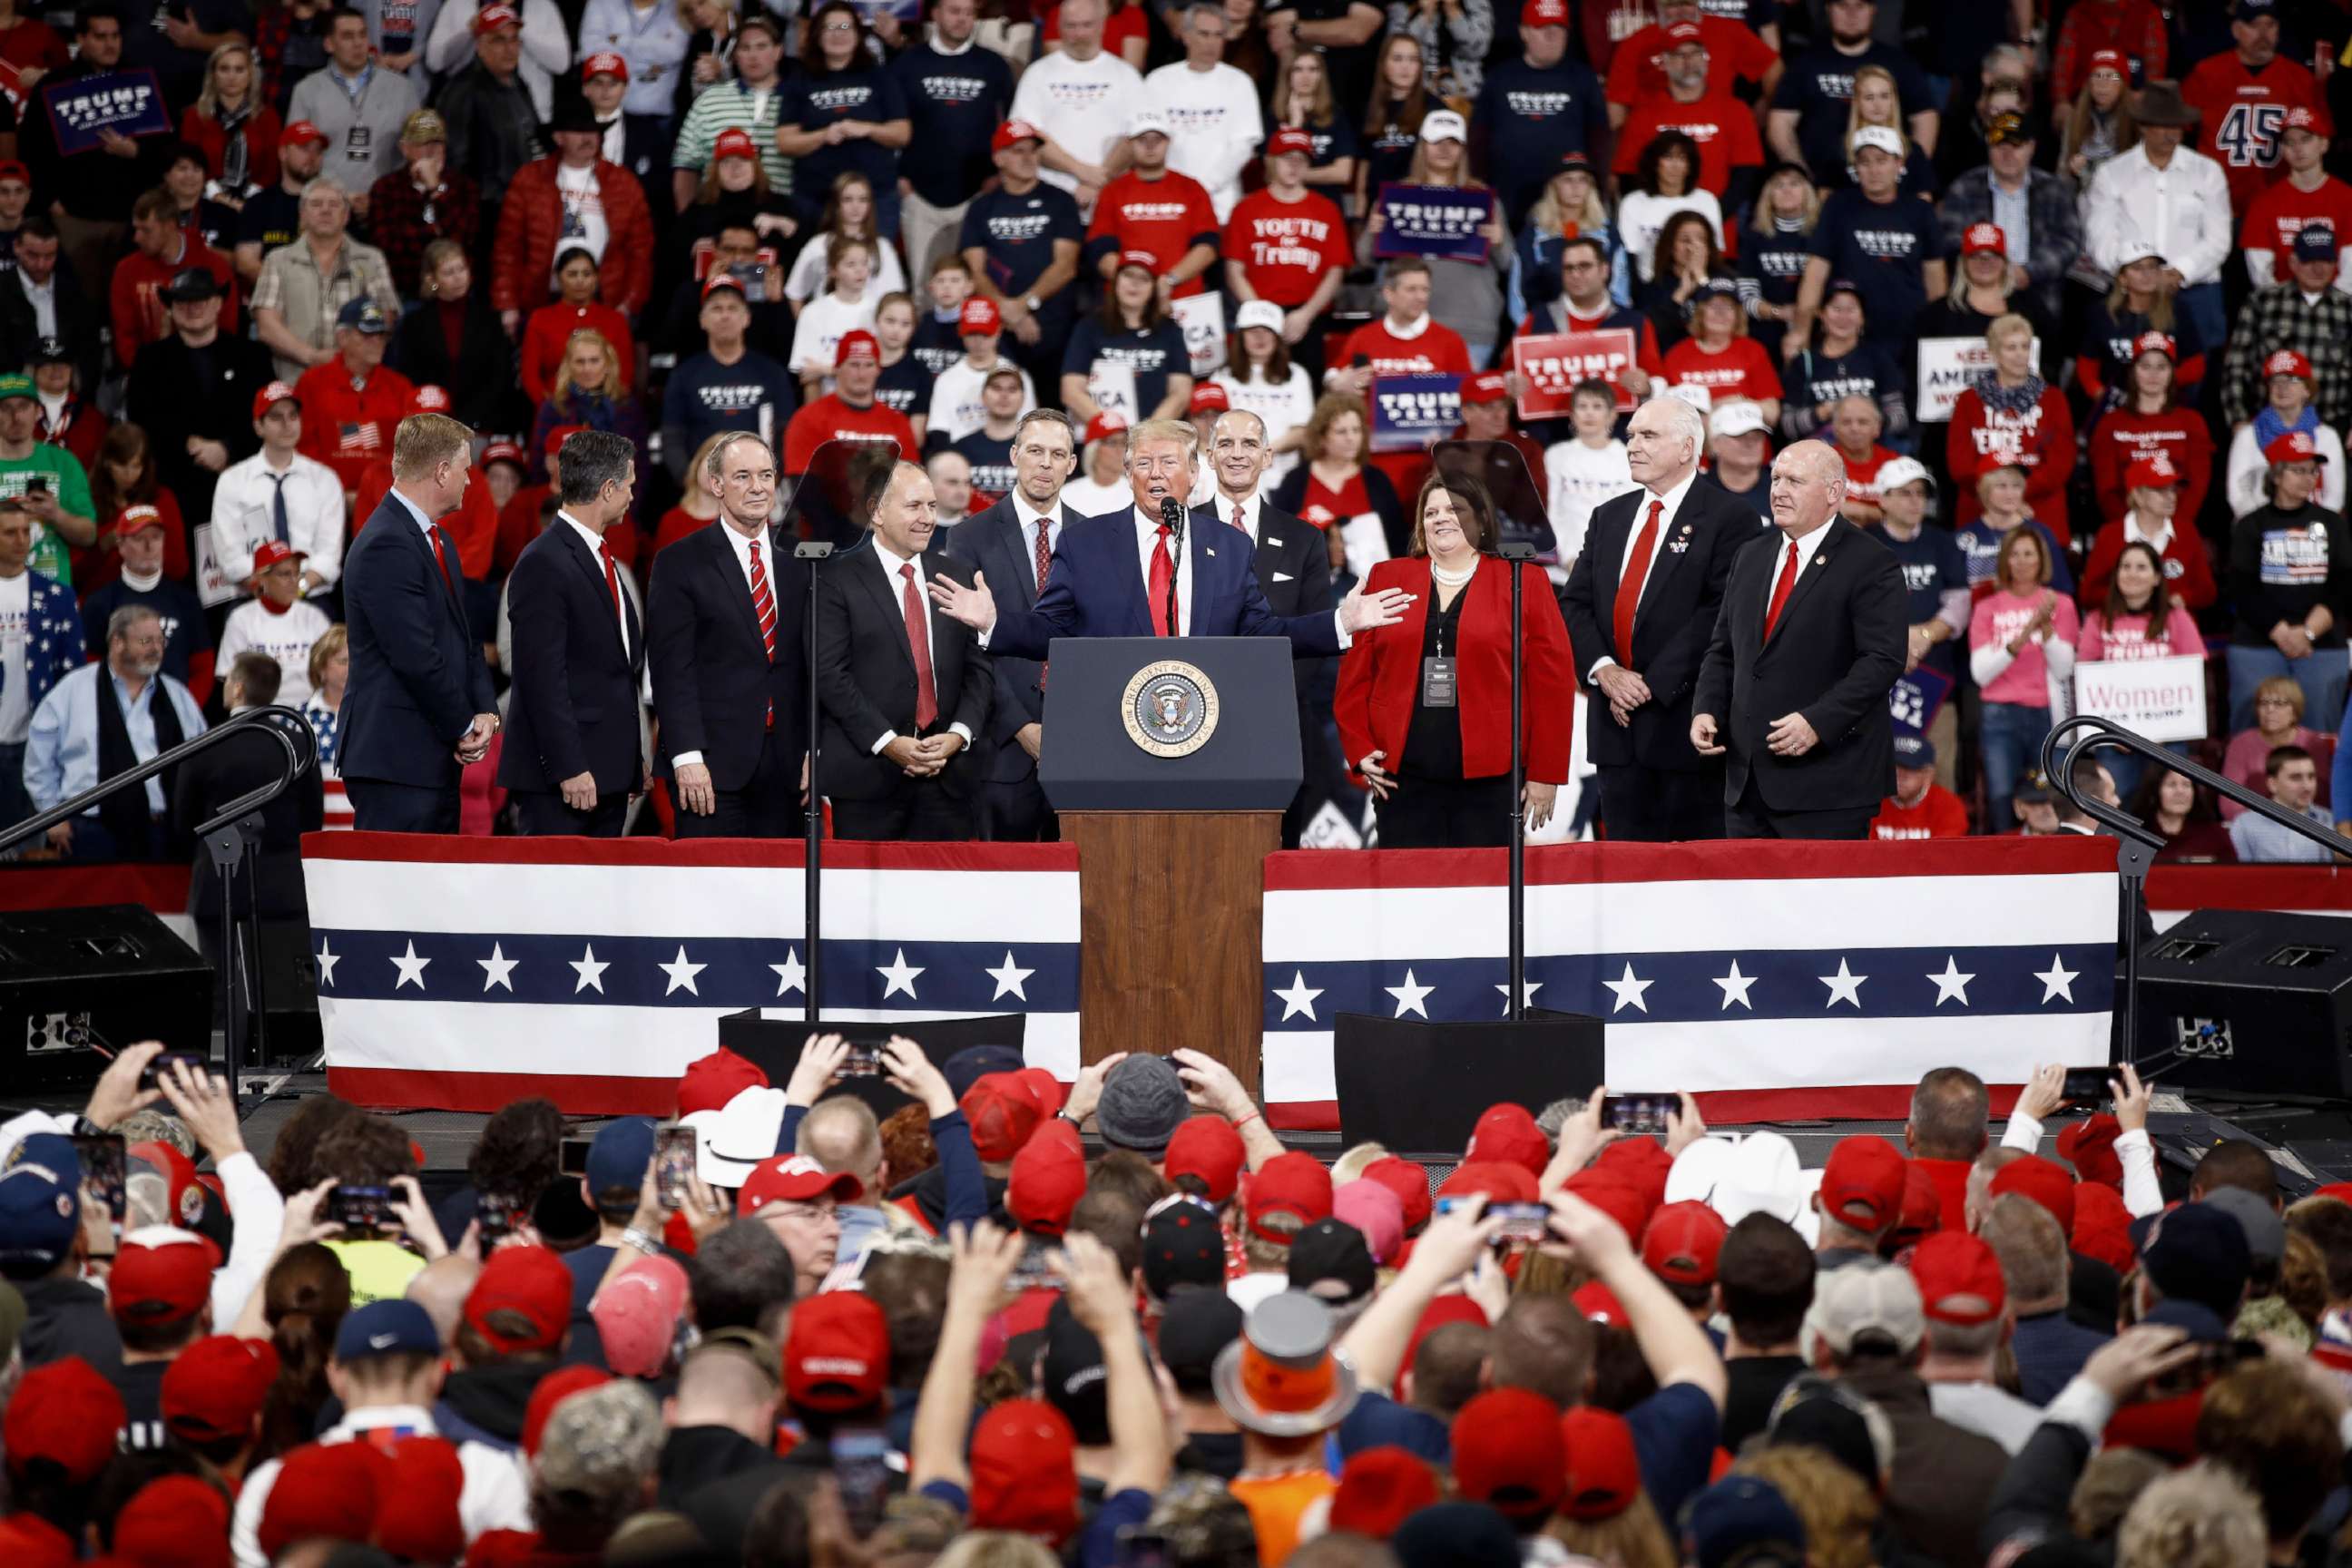 PHOTO: President Donald Trump, at podium, speaks during a campaign rally in Hershey, Pa., Dec. 10, 2019.